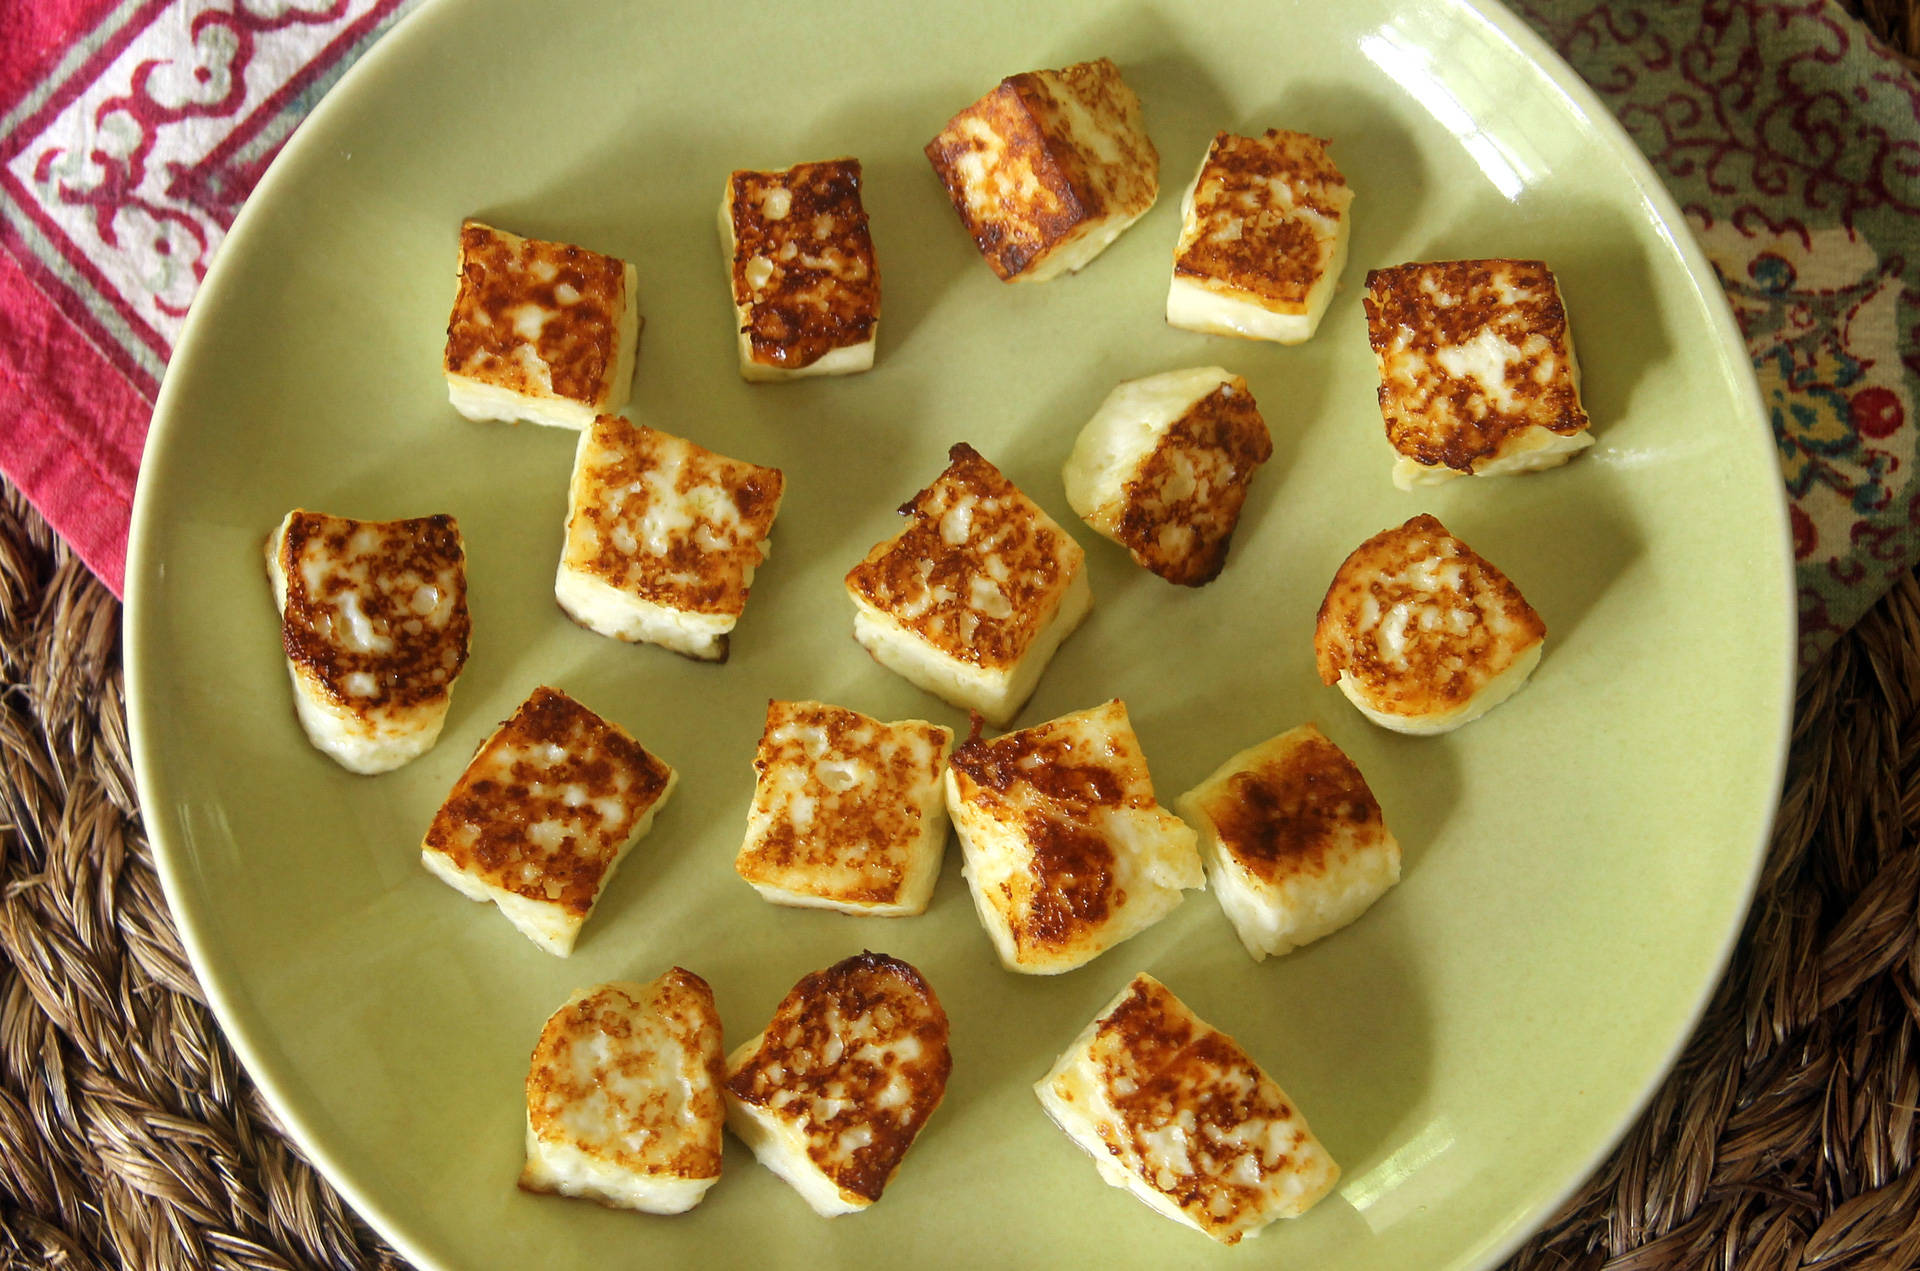 Homemade paneer, seared in olive oil